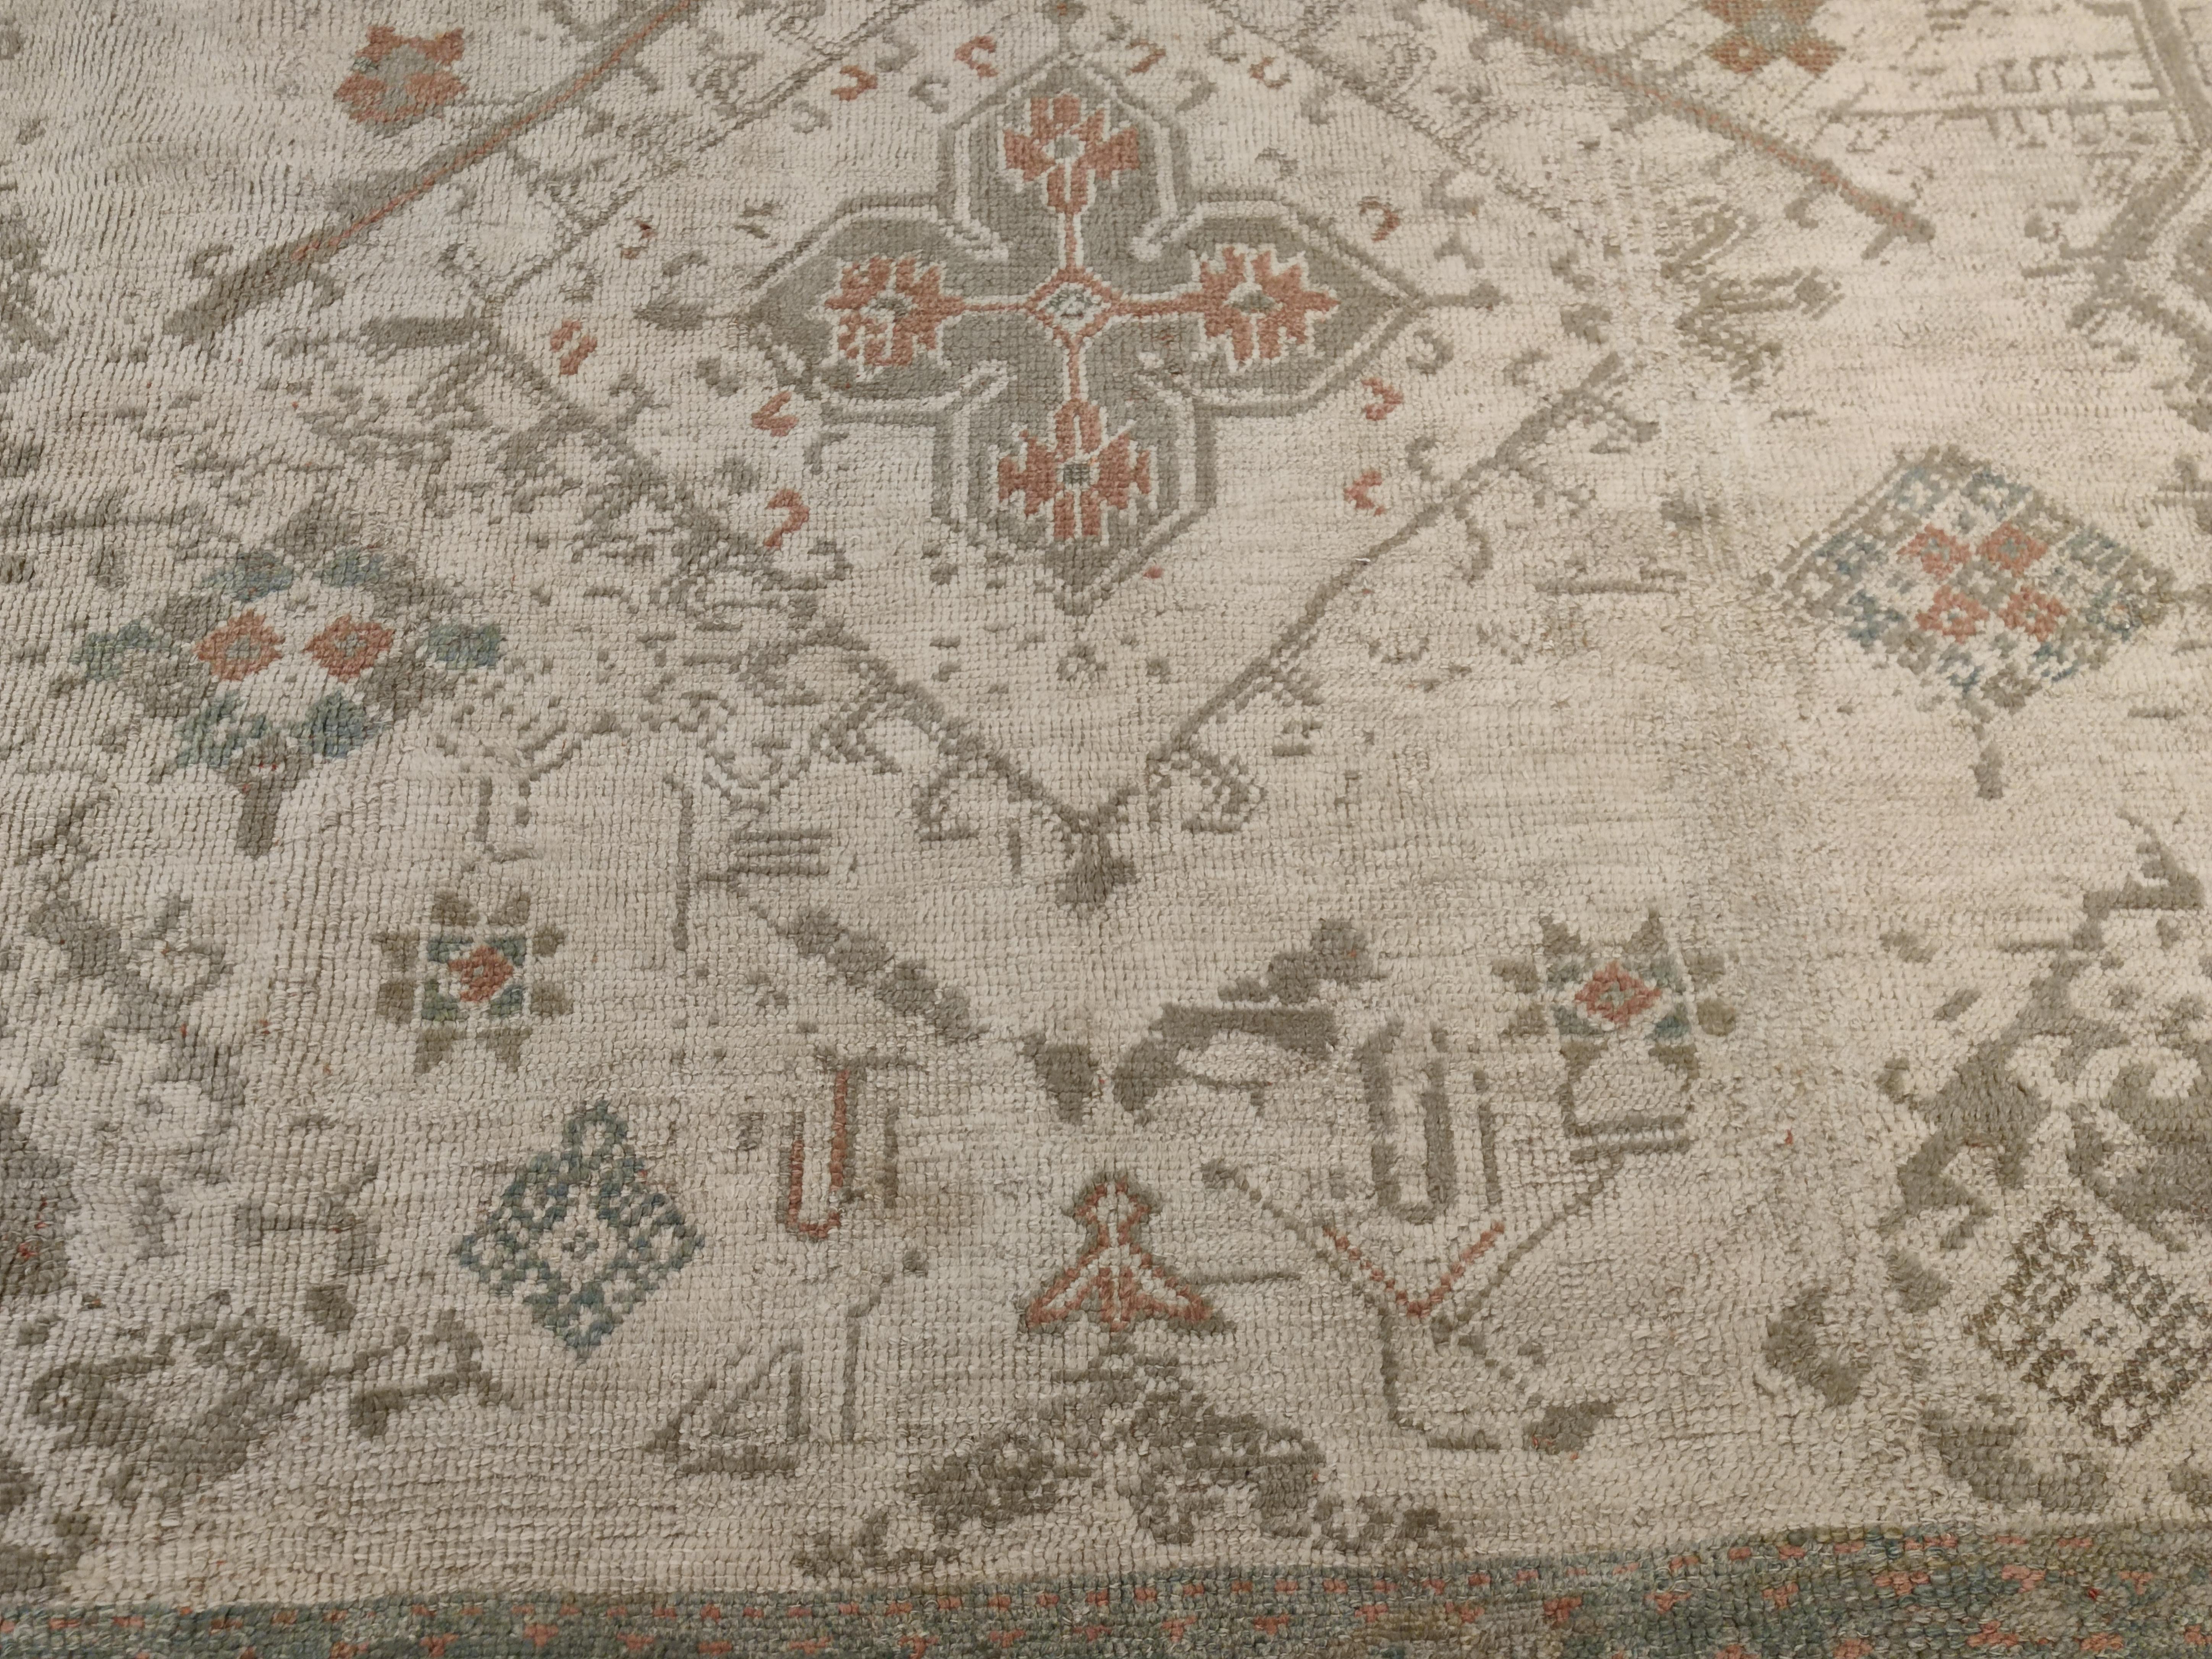 A refined and elegant oversize Oushak carpet, distinguished by a large scale, all-over pattern consisting of parallel and offset rows of four-pointed stars characteristic of 16th century Oushak rugs woven for the Ottoman court. The soft palette